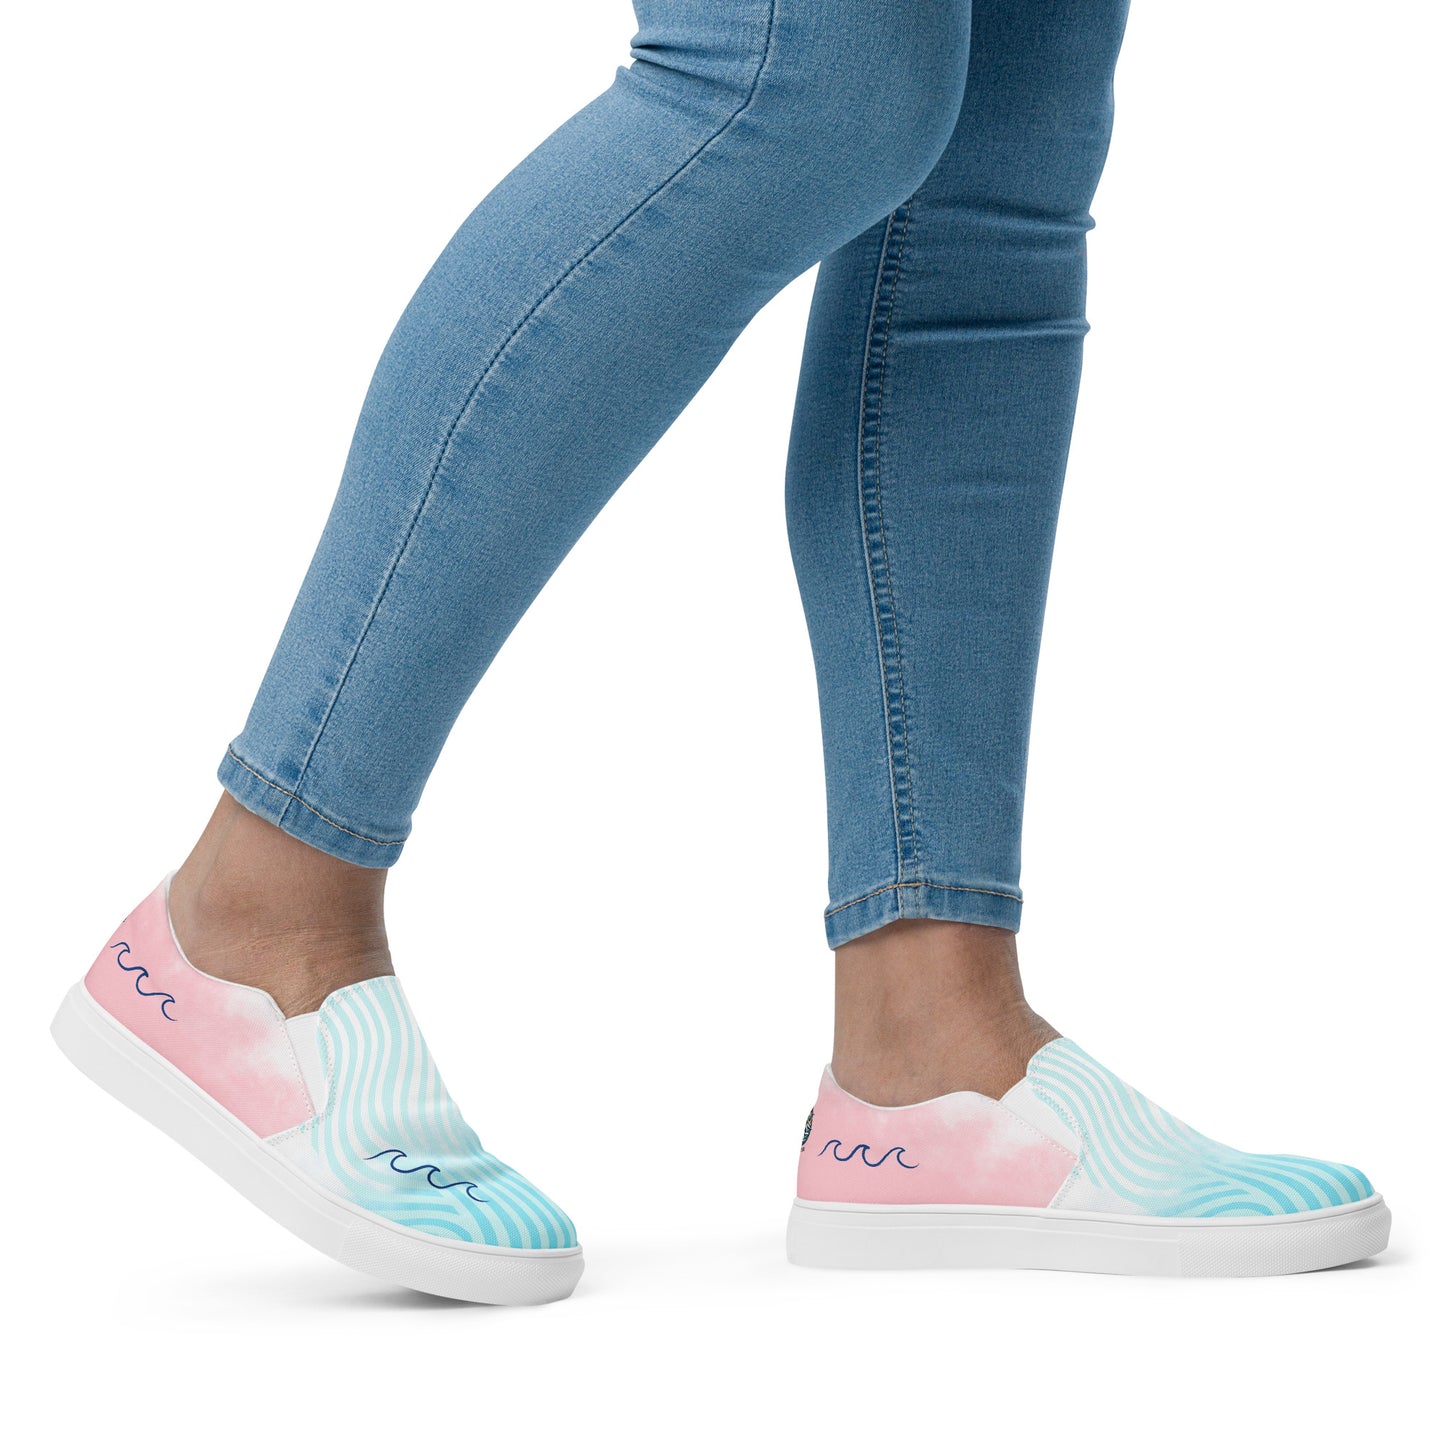 Walking on Waves Women’s slip-on canvas shoes by Our BoatyVerse